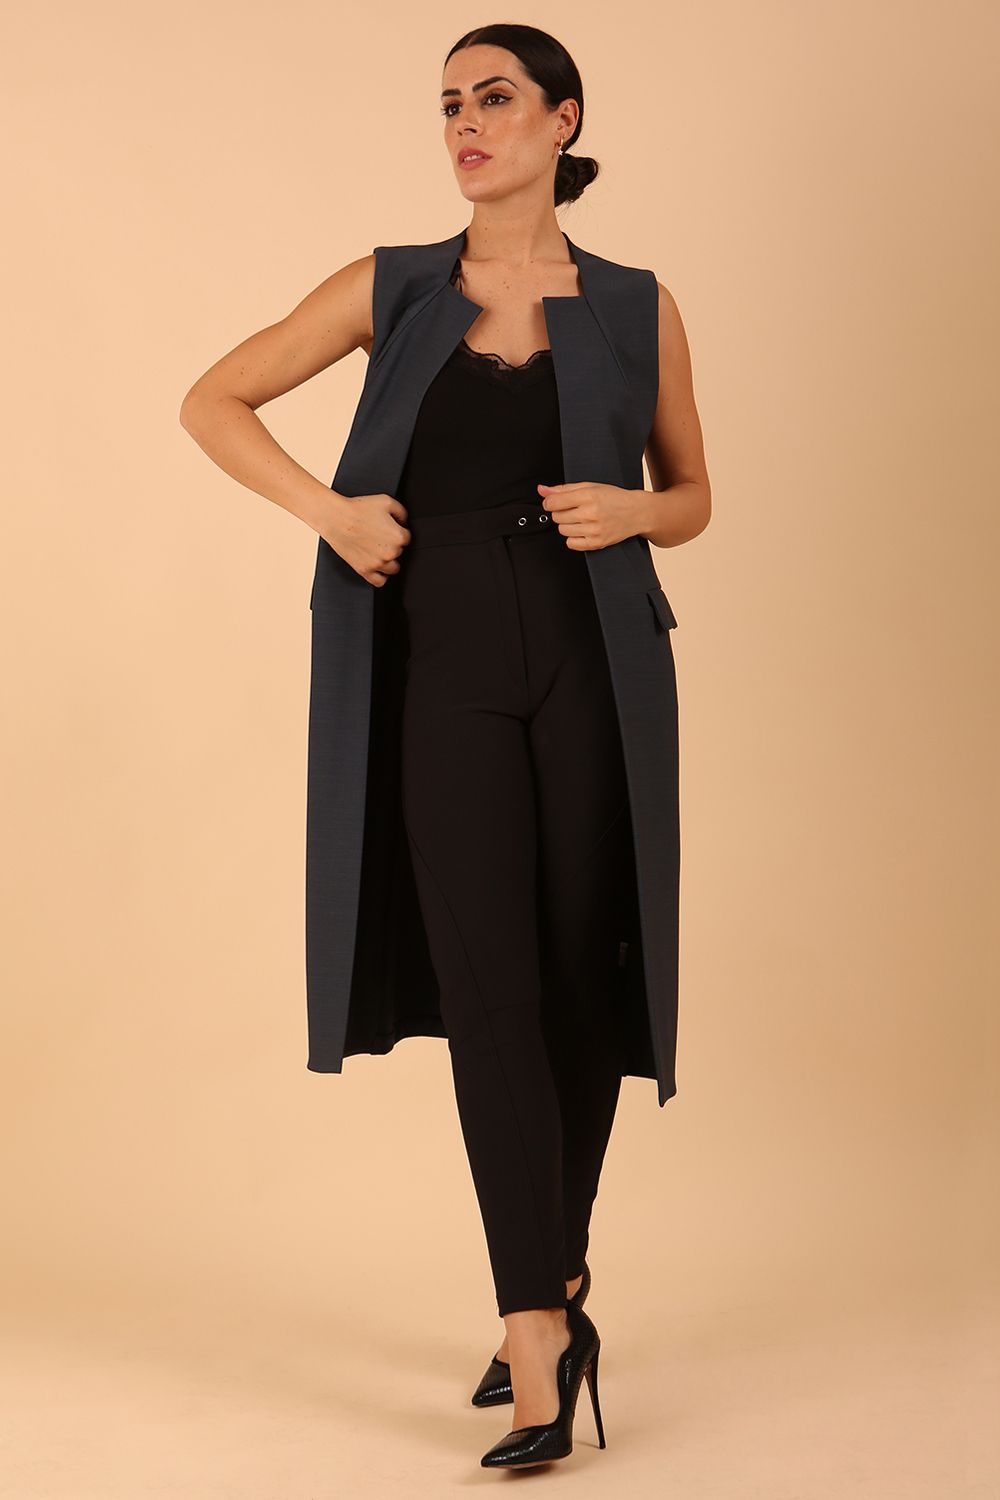 model wearing a divacatwalk Seed Harvard Sleeveless Coat midi length in Slate Grey colour front